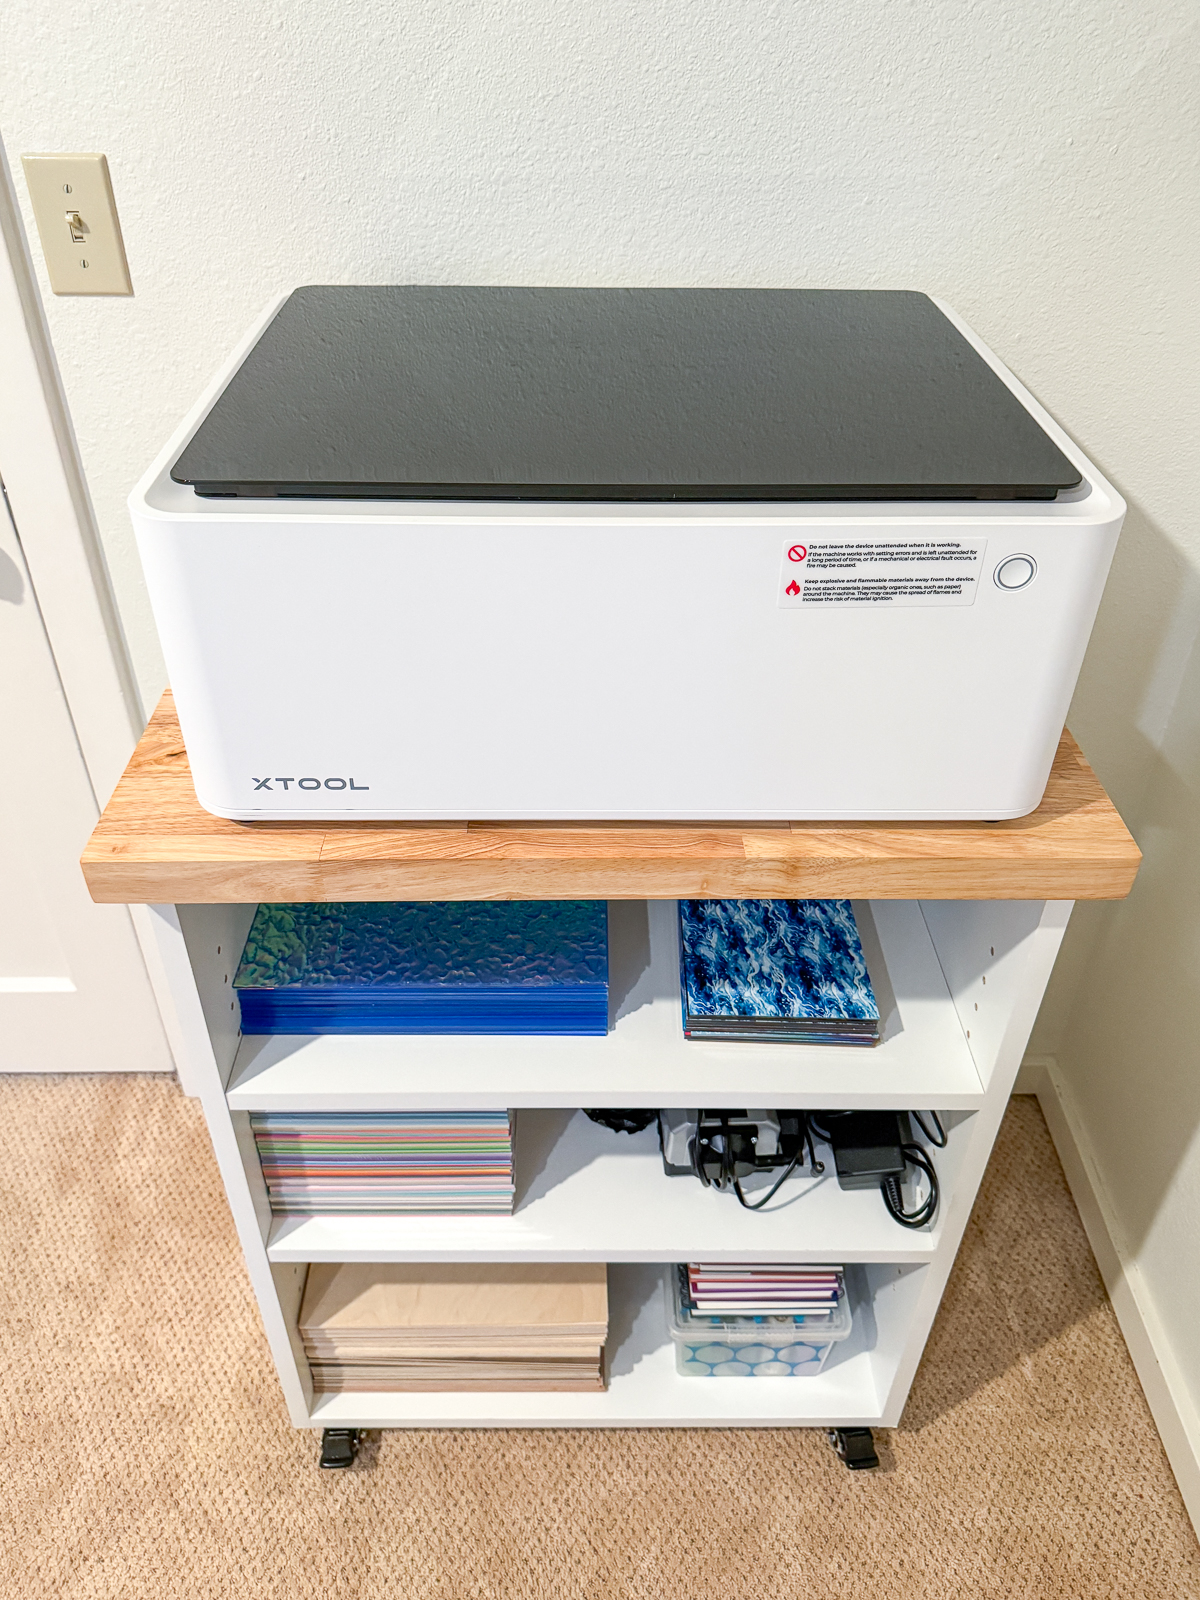 DIY craft cabinet with xTool M1 laser cutter and supplies